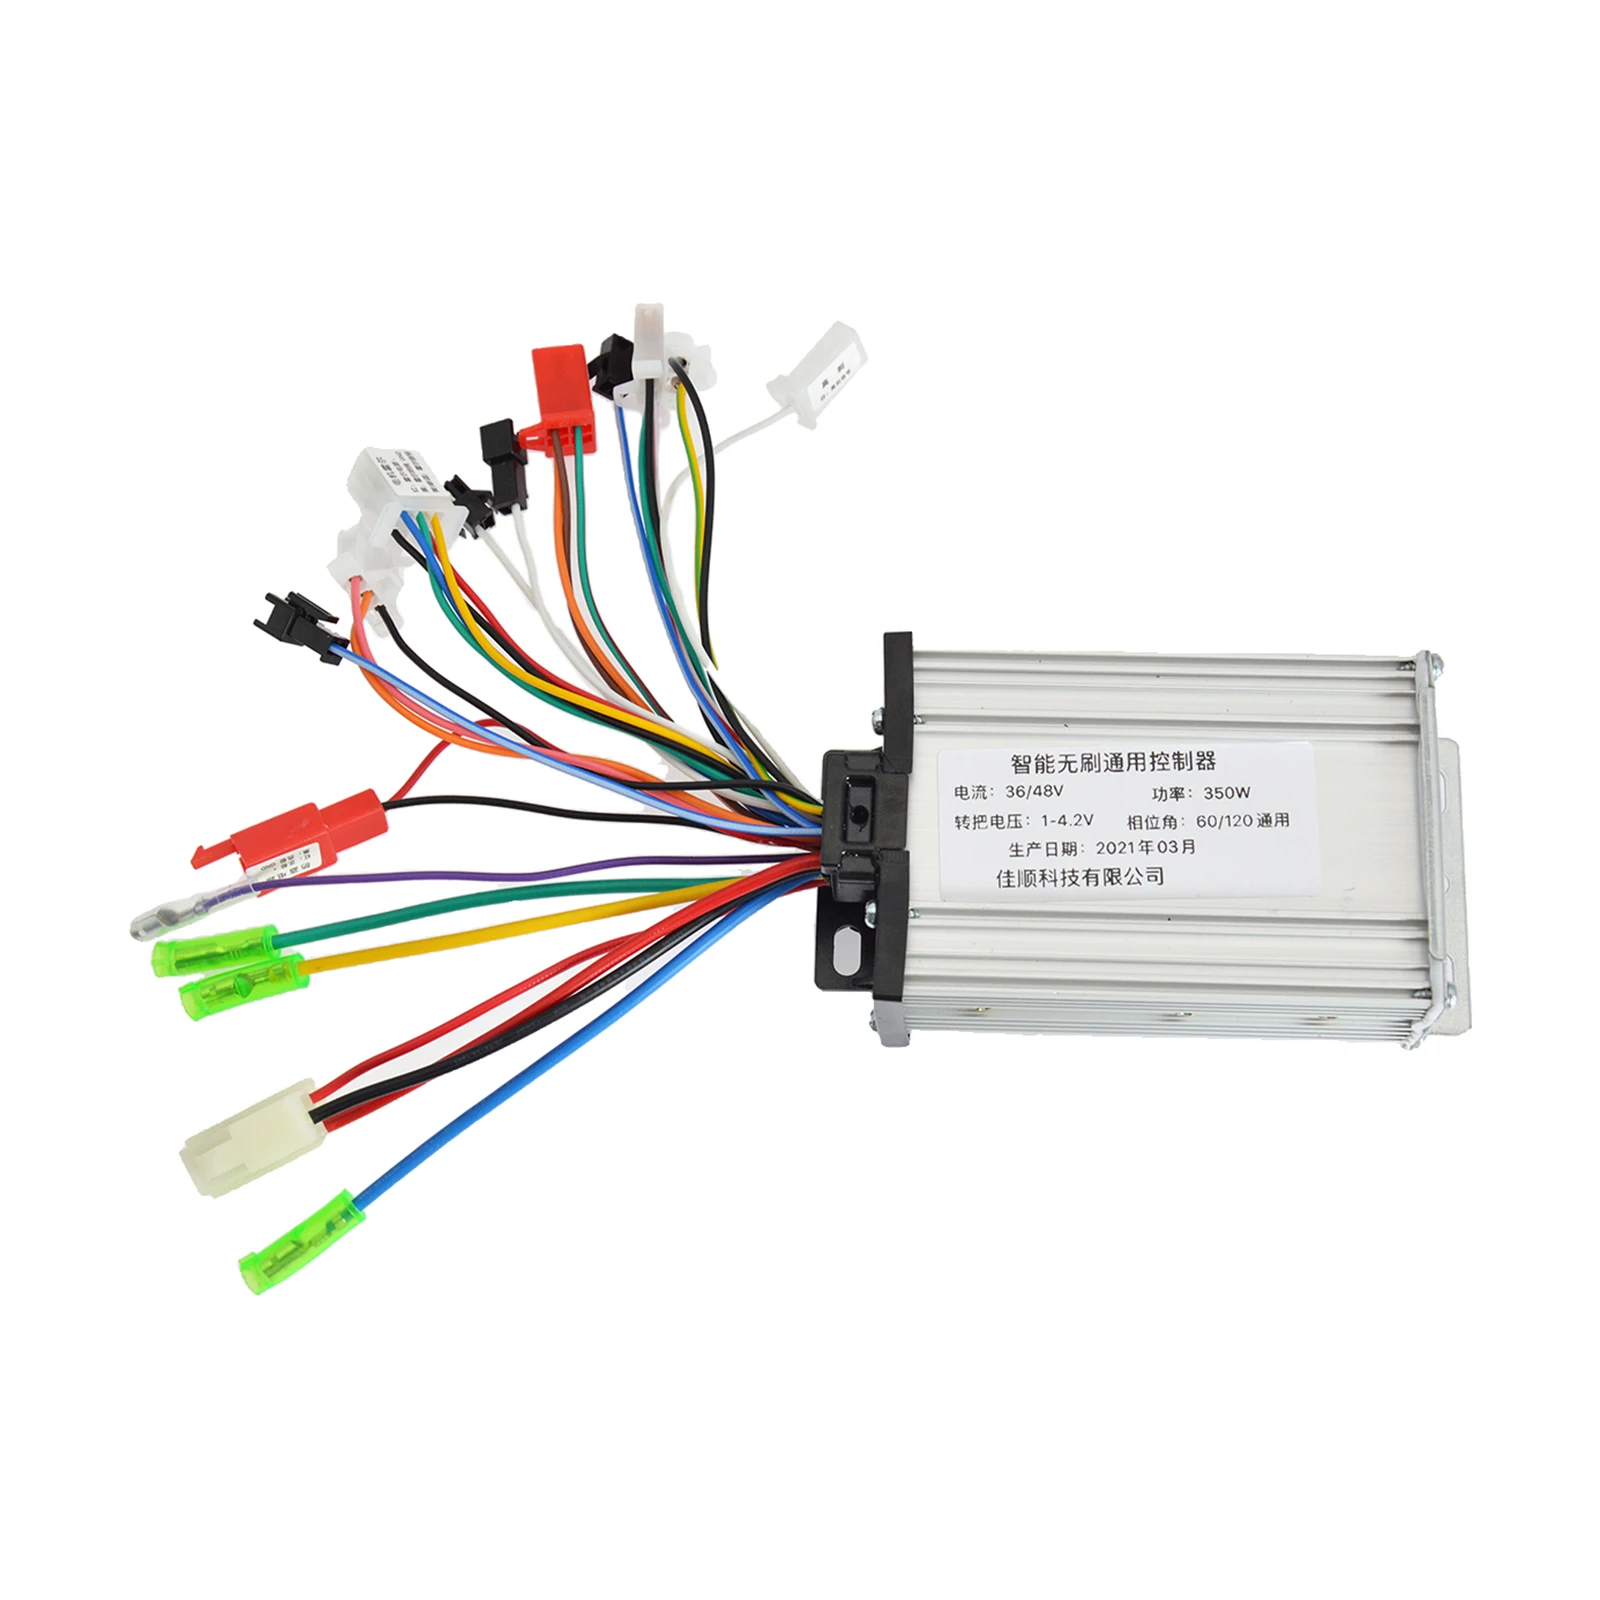 Deluxe Electric Bicycle Controller Brushless DC Motor Control Box Speed